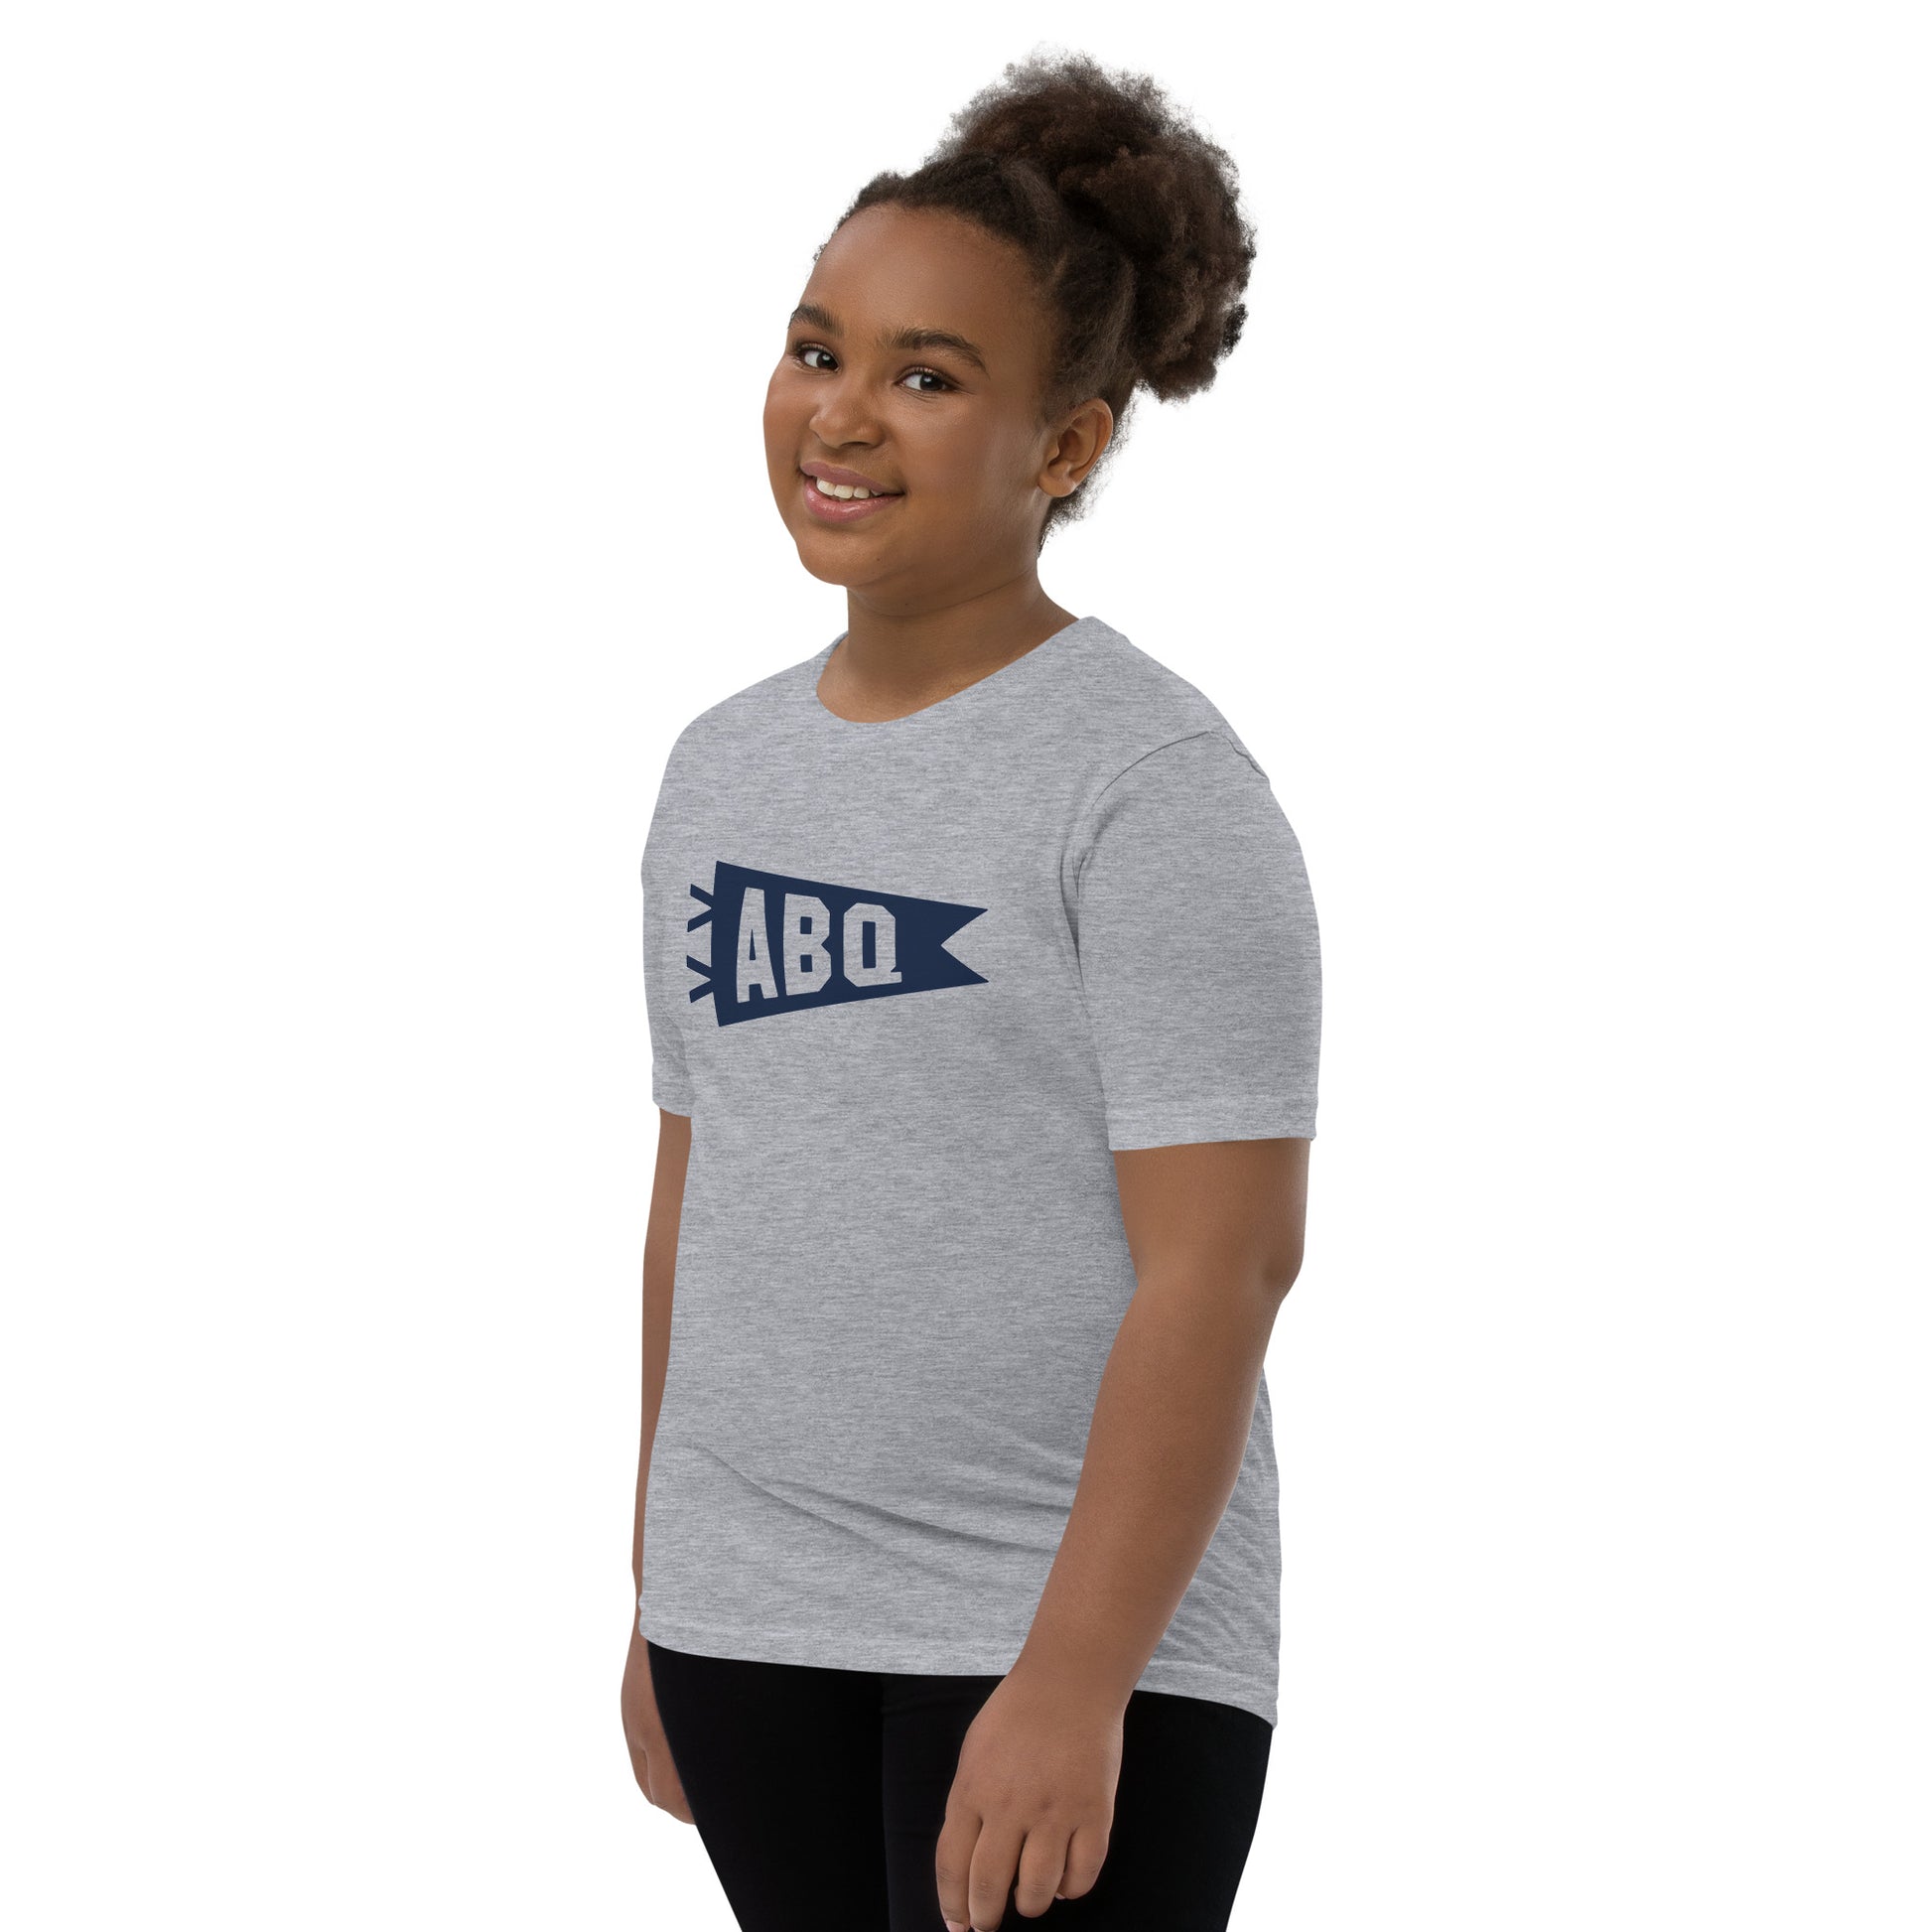 Kid's Airport Code Tee - Navy Blue Graphic • ABQ Albuquerque • YHM Designs - Image 04